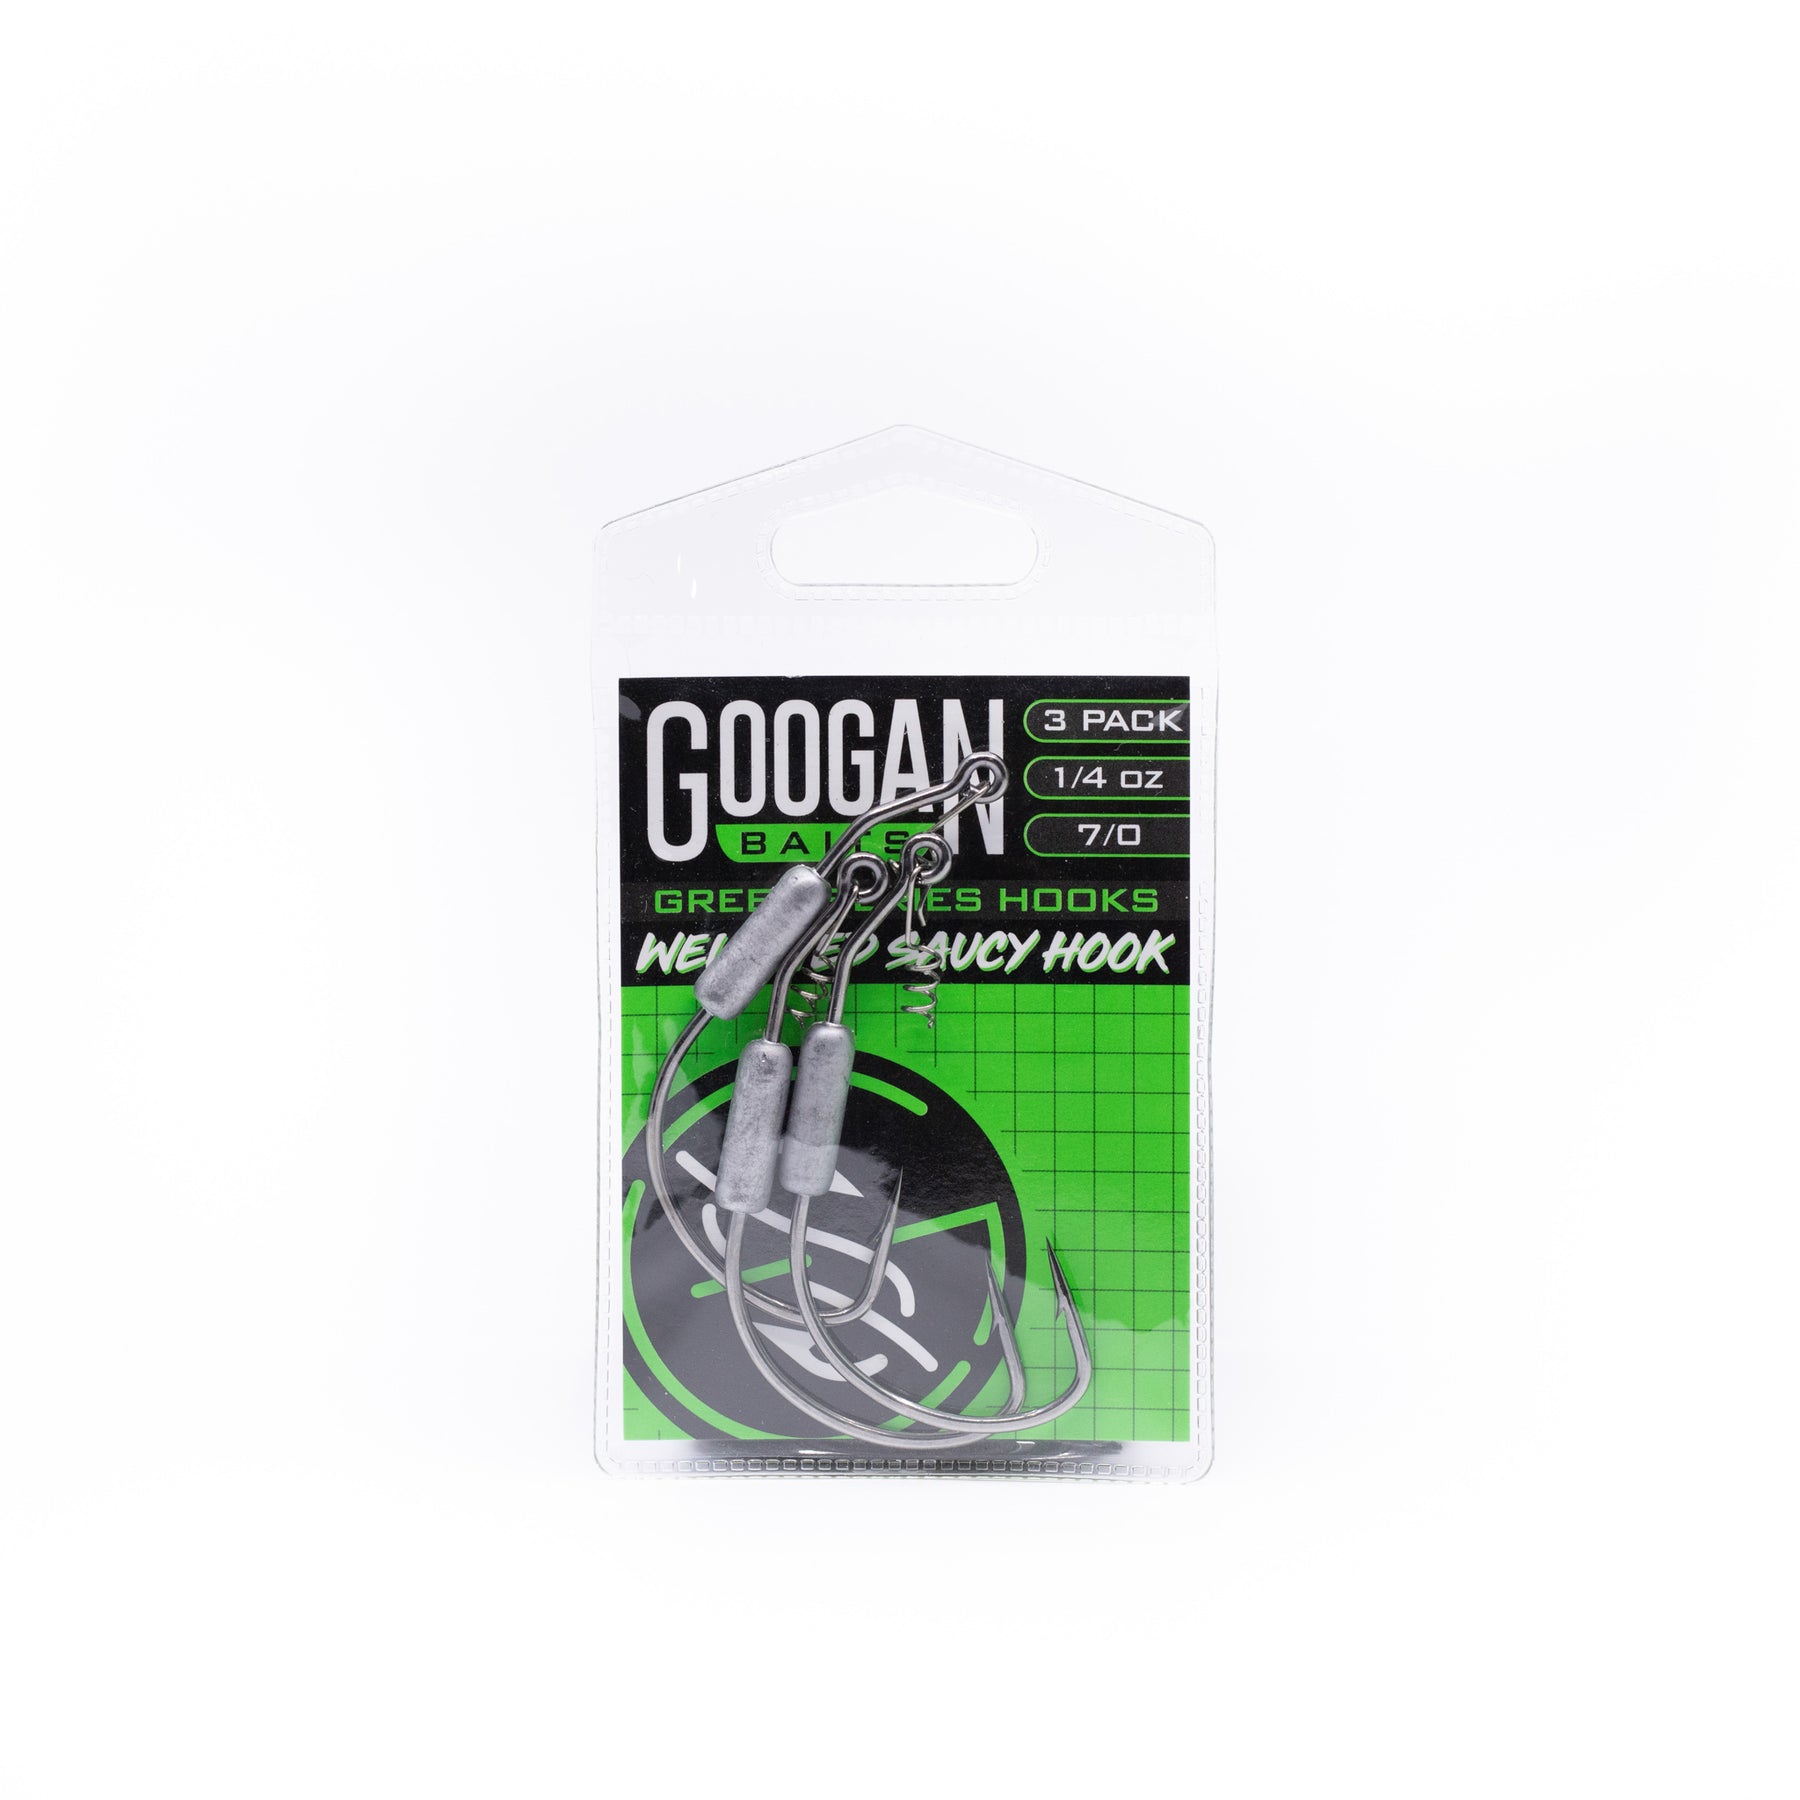 Weighted Saucy Hook – Googan Squad